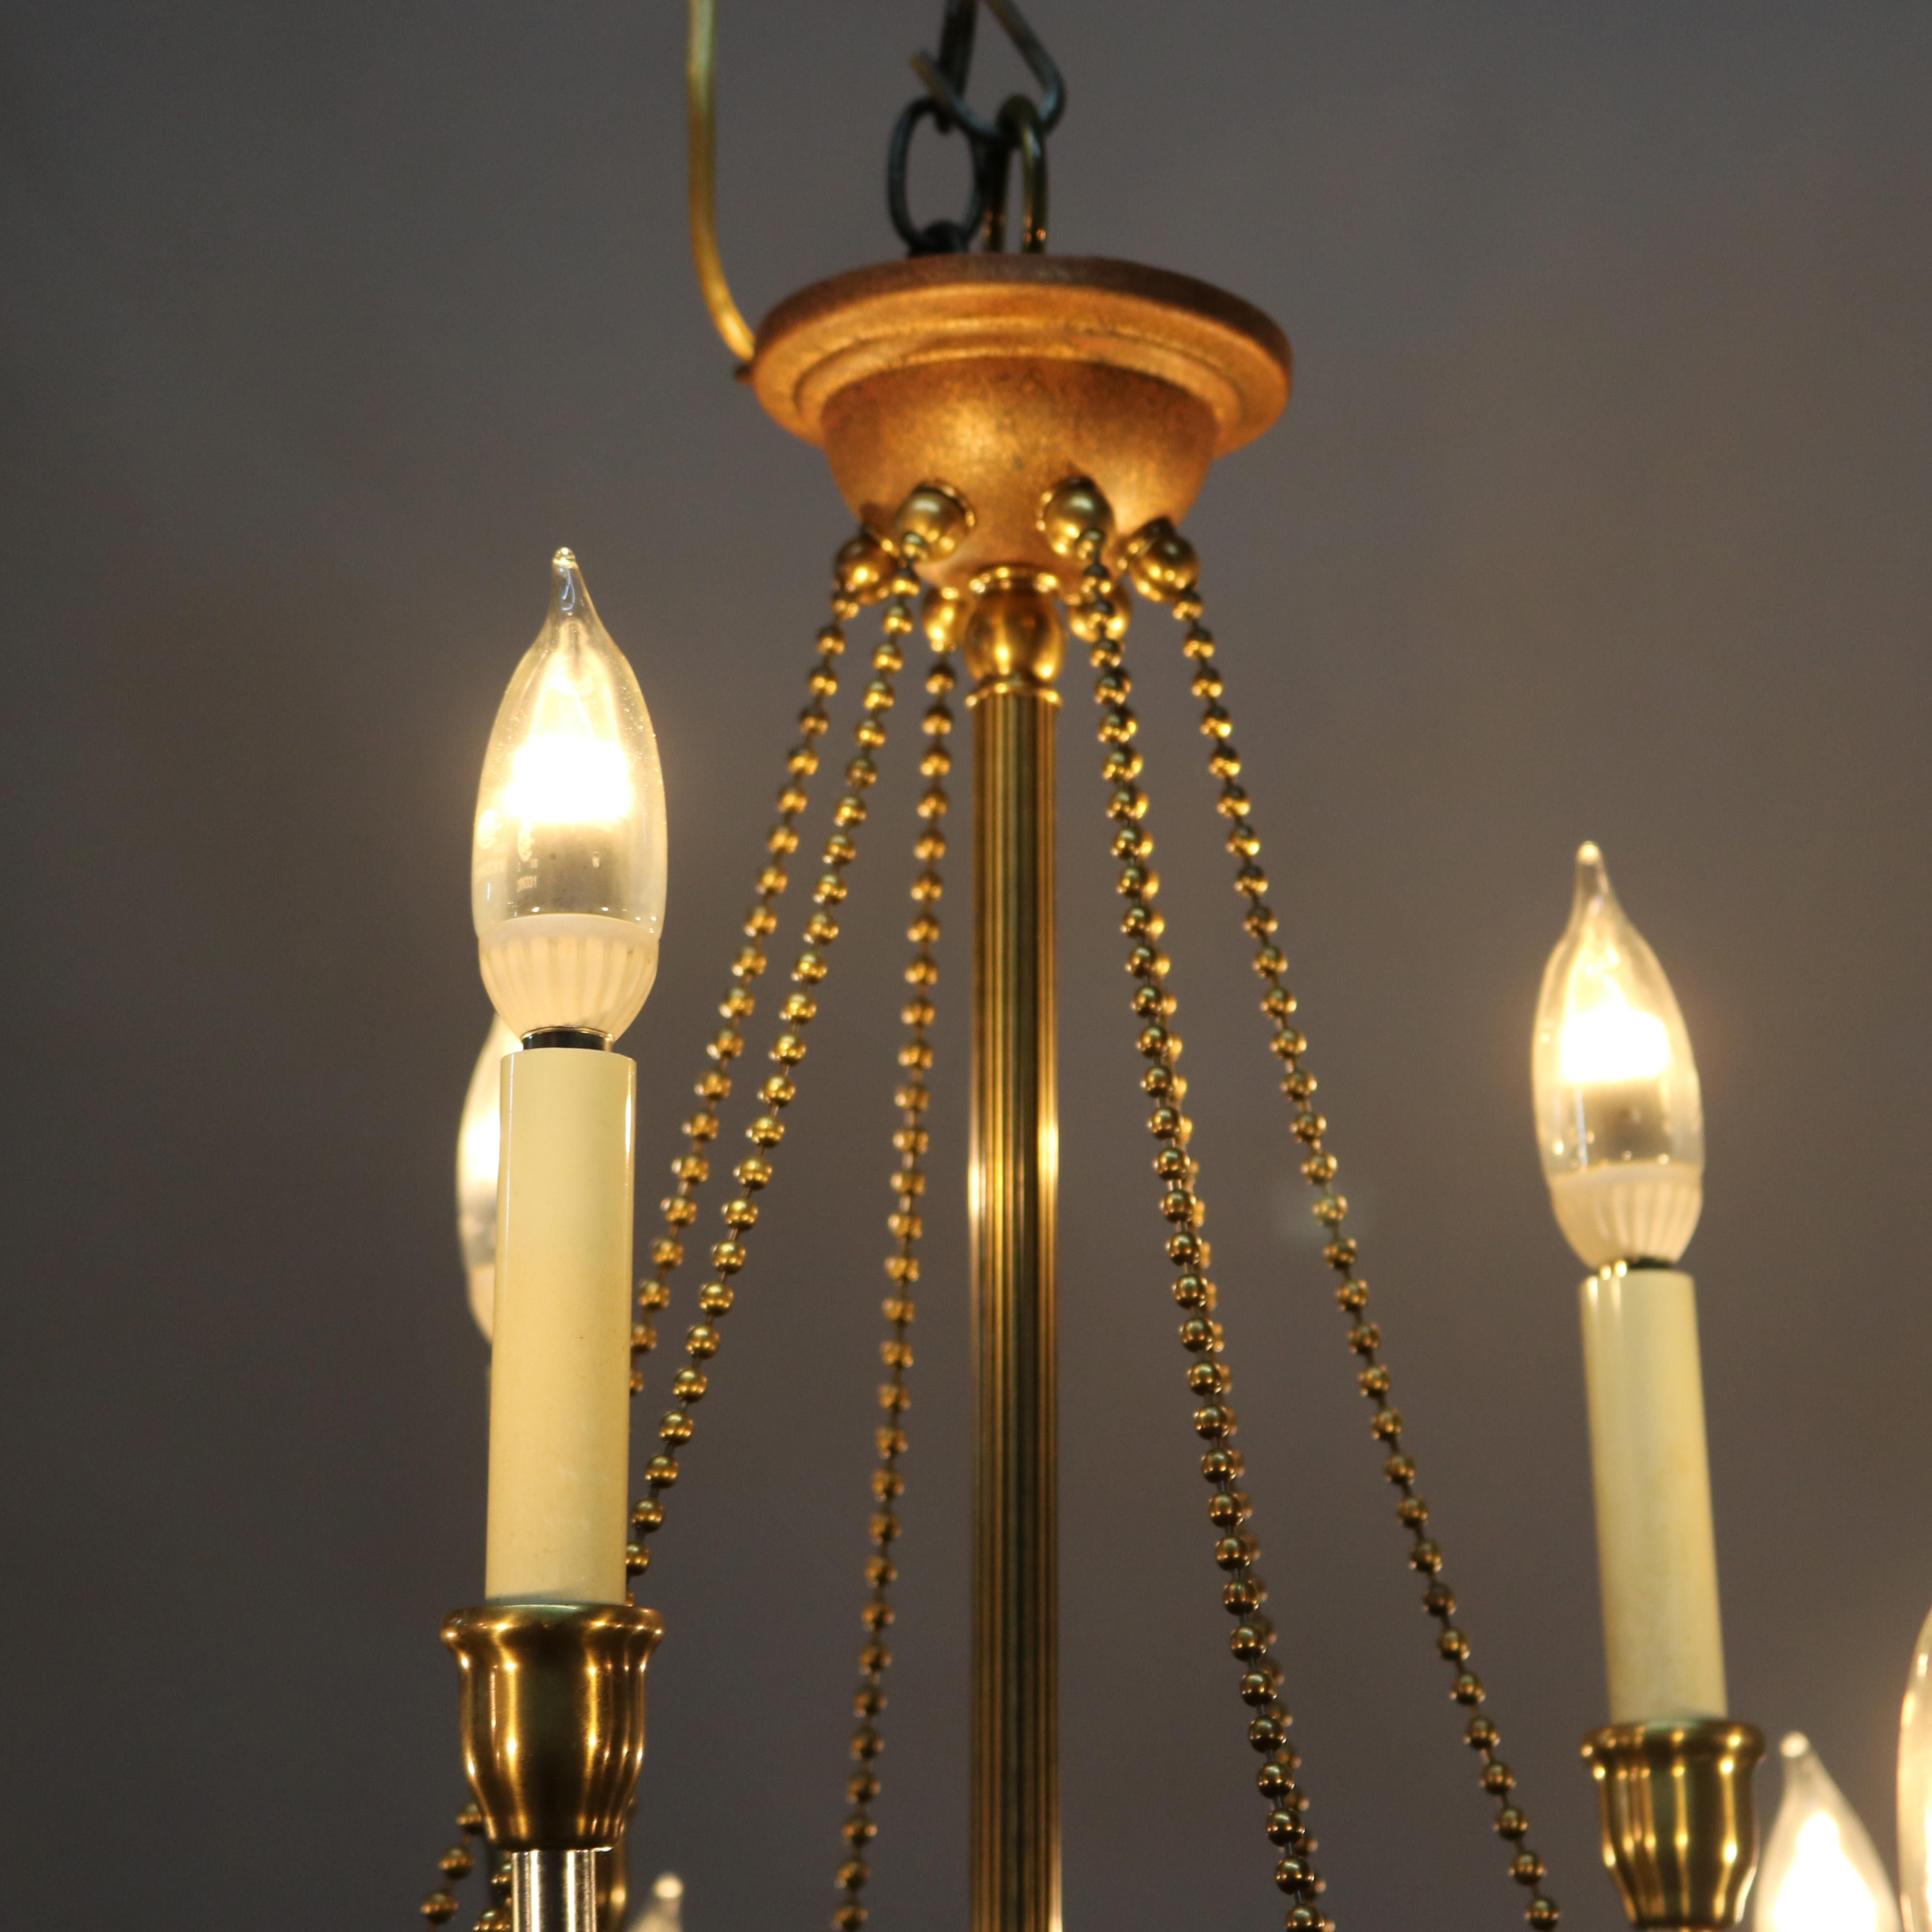 Vintage French Nine-Light Tiered Brass and Crystal Chandelier, 20th Century For Sale 3